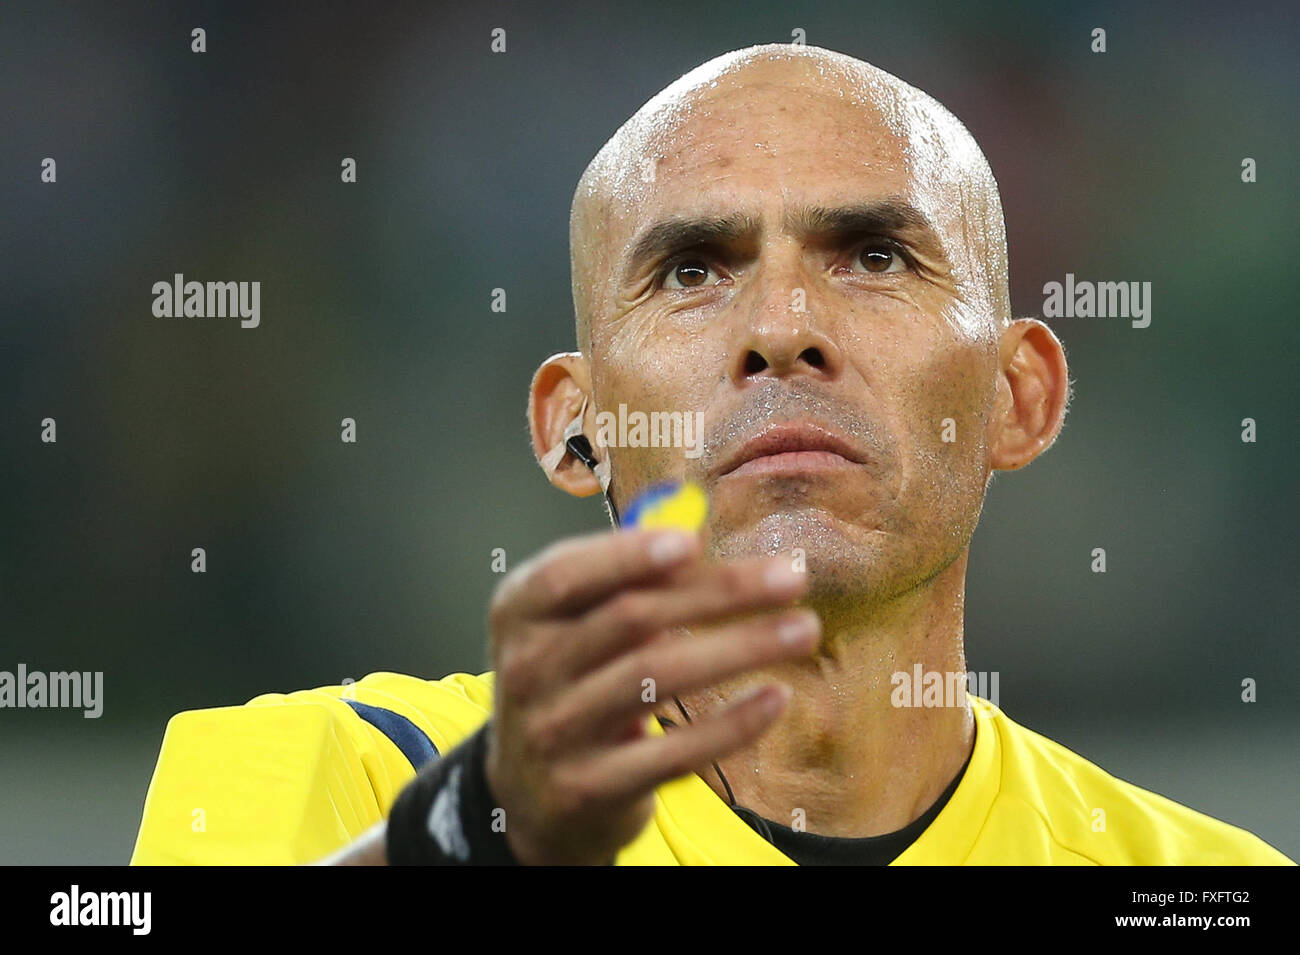 SAO PAULO, Brazil - 04/14/2016: PALM RIVER PLATE X URU - Oscar Maldonado referee, the match between the teams of SE Palmeiras and CA River Plate during match valid for the sixth round of the group stage of the Copa Libertadores, the Arena Allianz Park. Photo: Cesar Greco / FotoArena/Alamy Live News Stock Photo